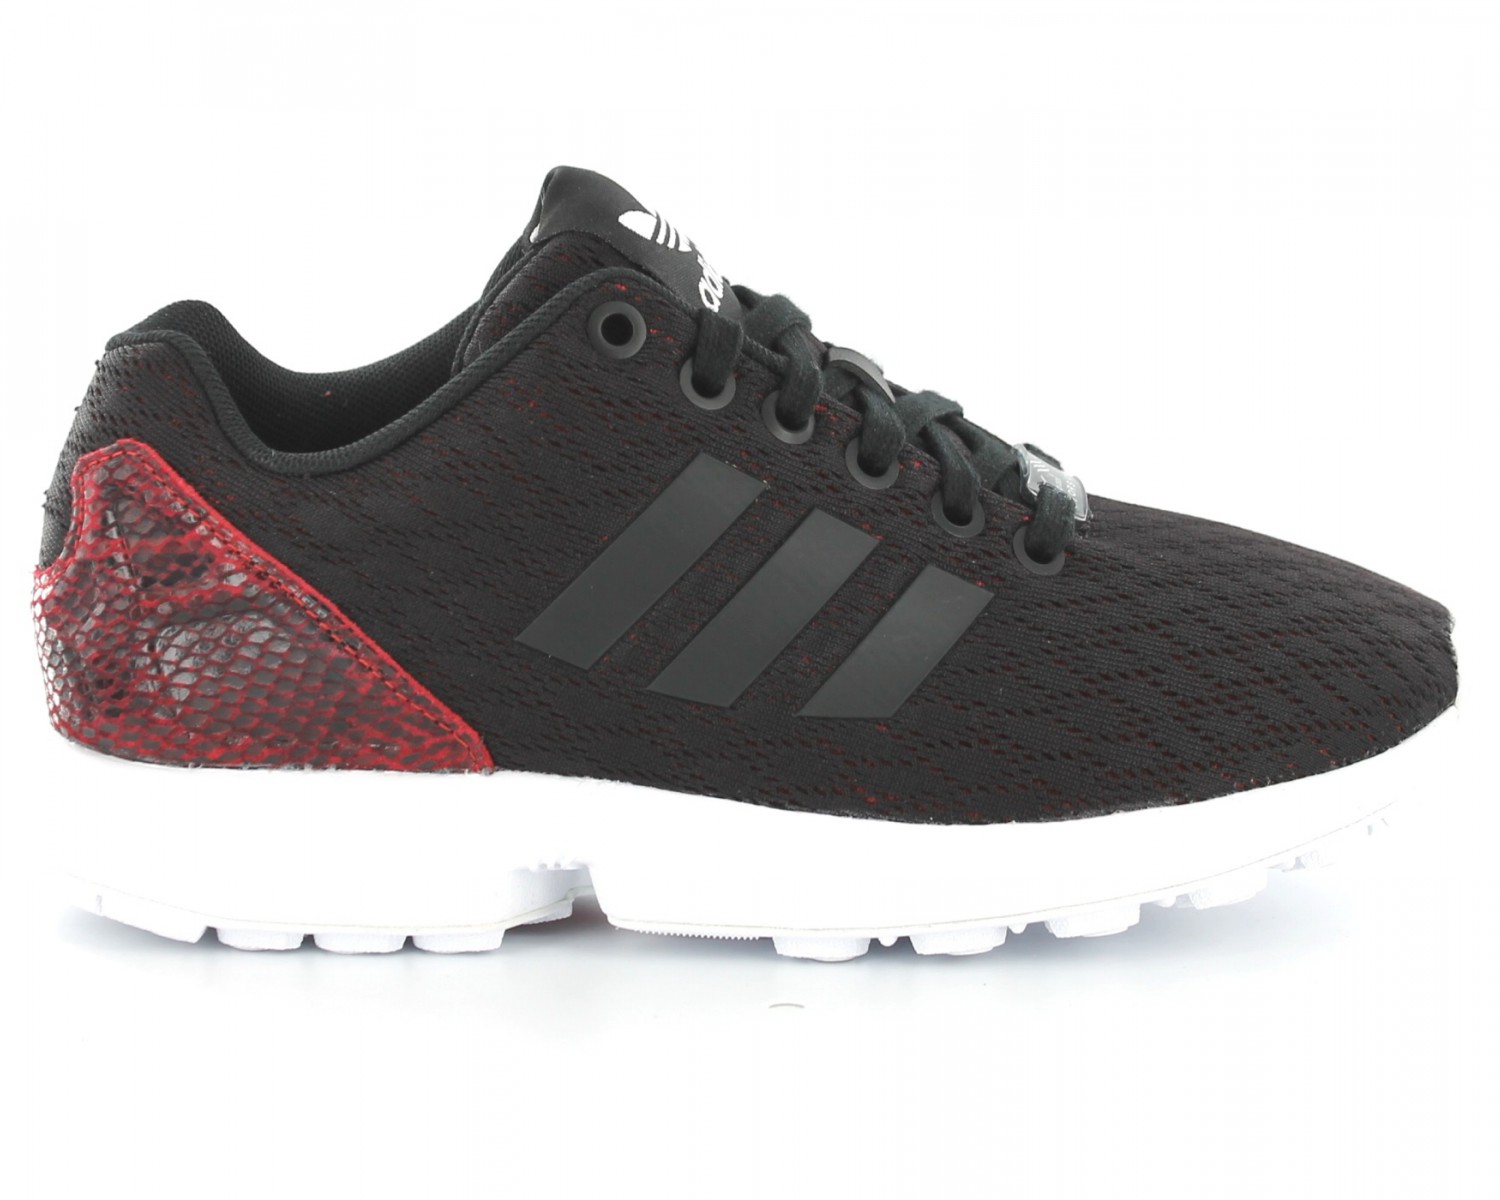 zx flux adidas rouge